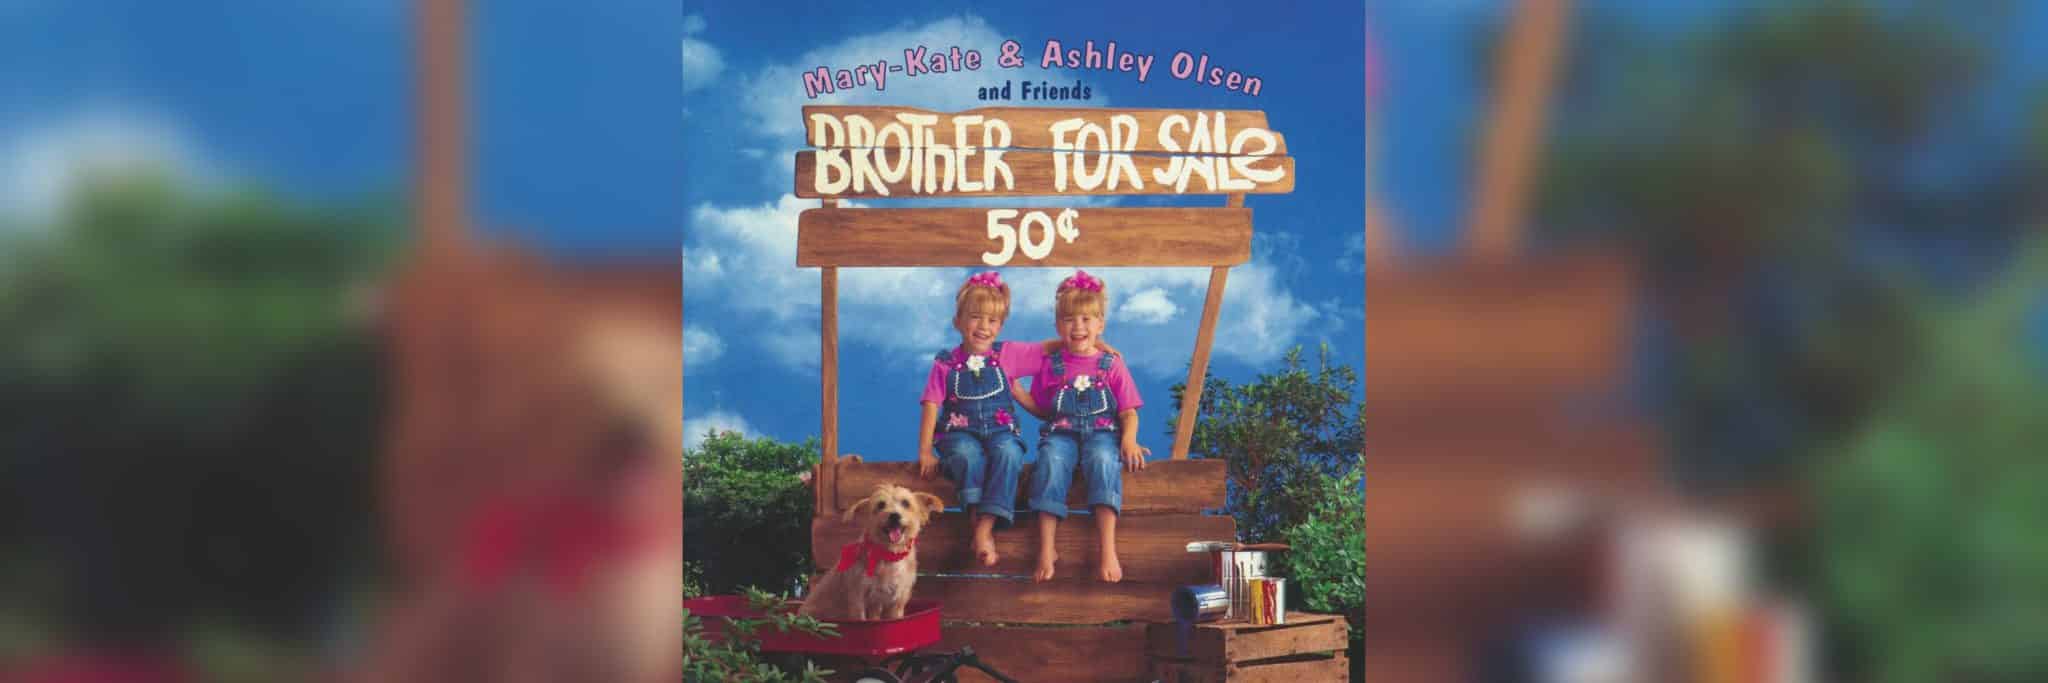 An Oral History of Mary Kate and Ashley Olsen’s 1993 Music Video “Brother for Sale”